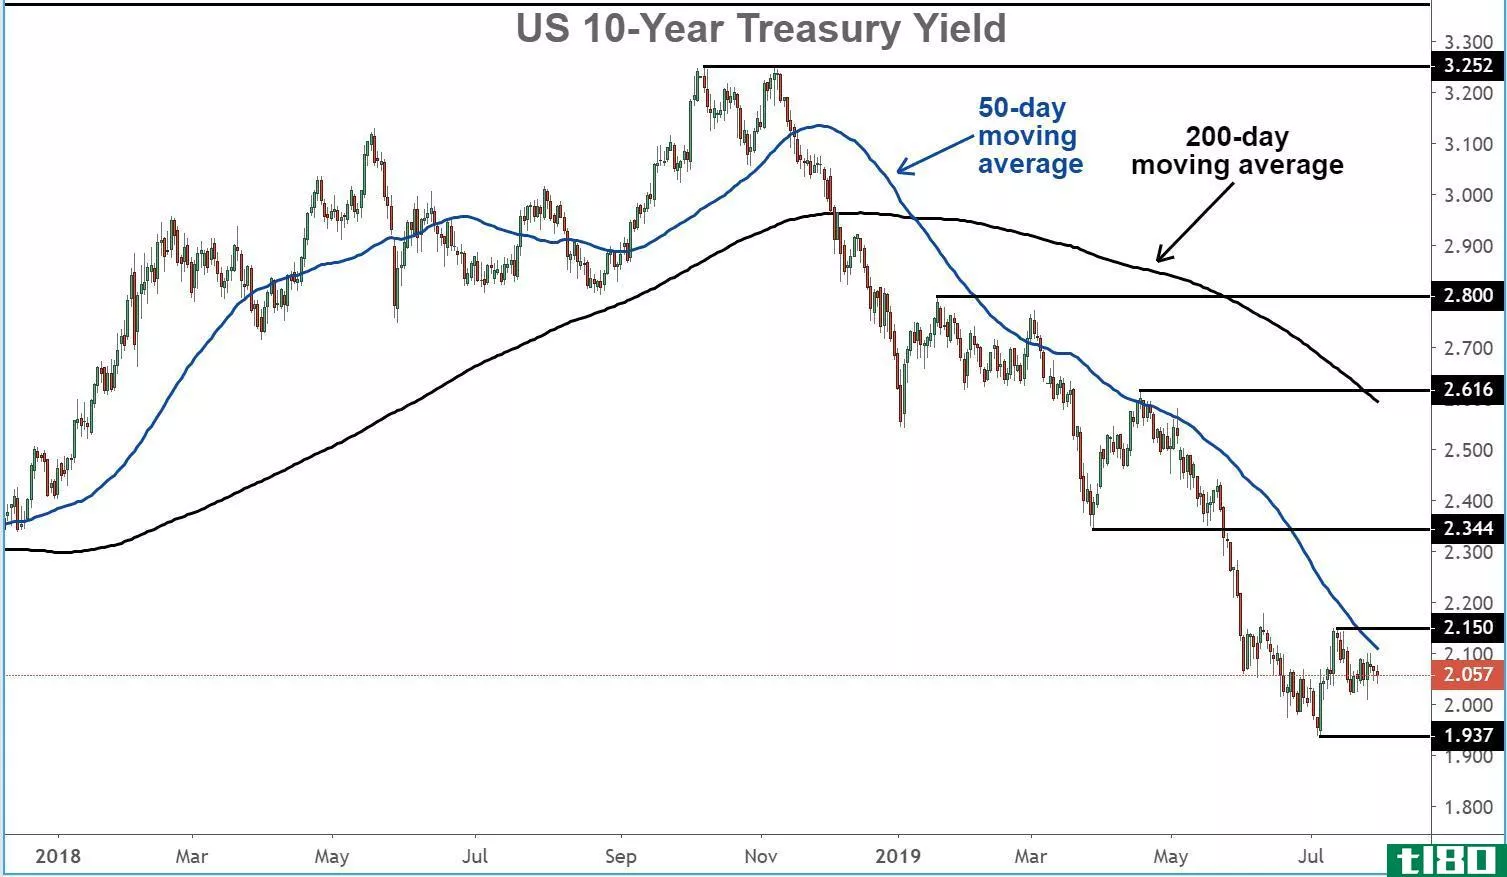 Chart showing the performance of the U.S. 10-Year Treasury Yield